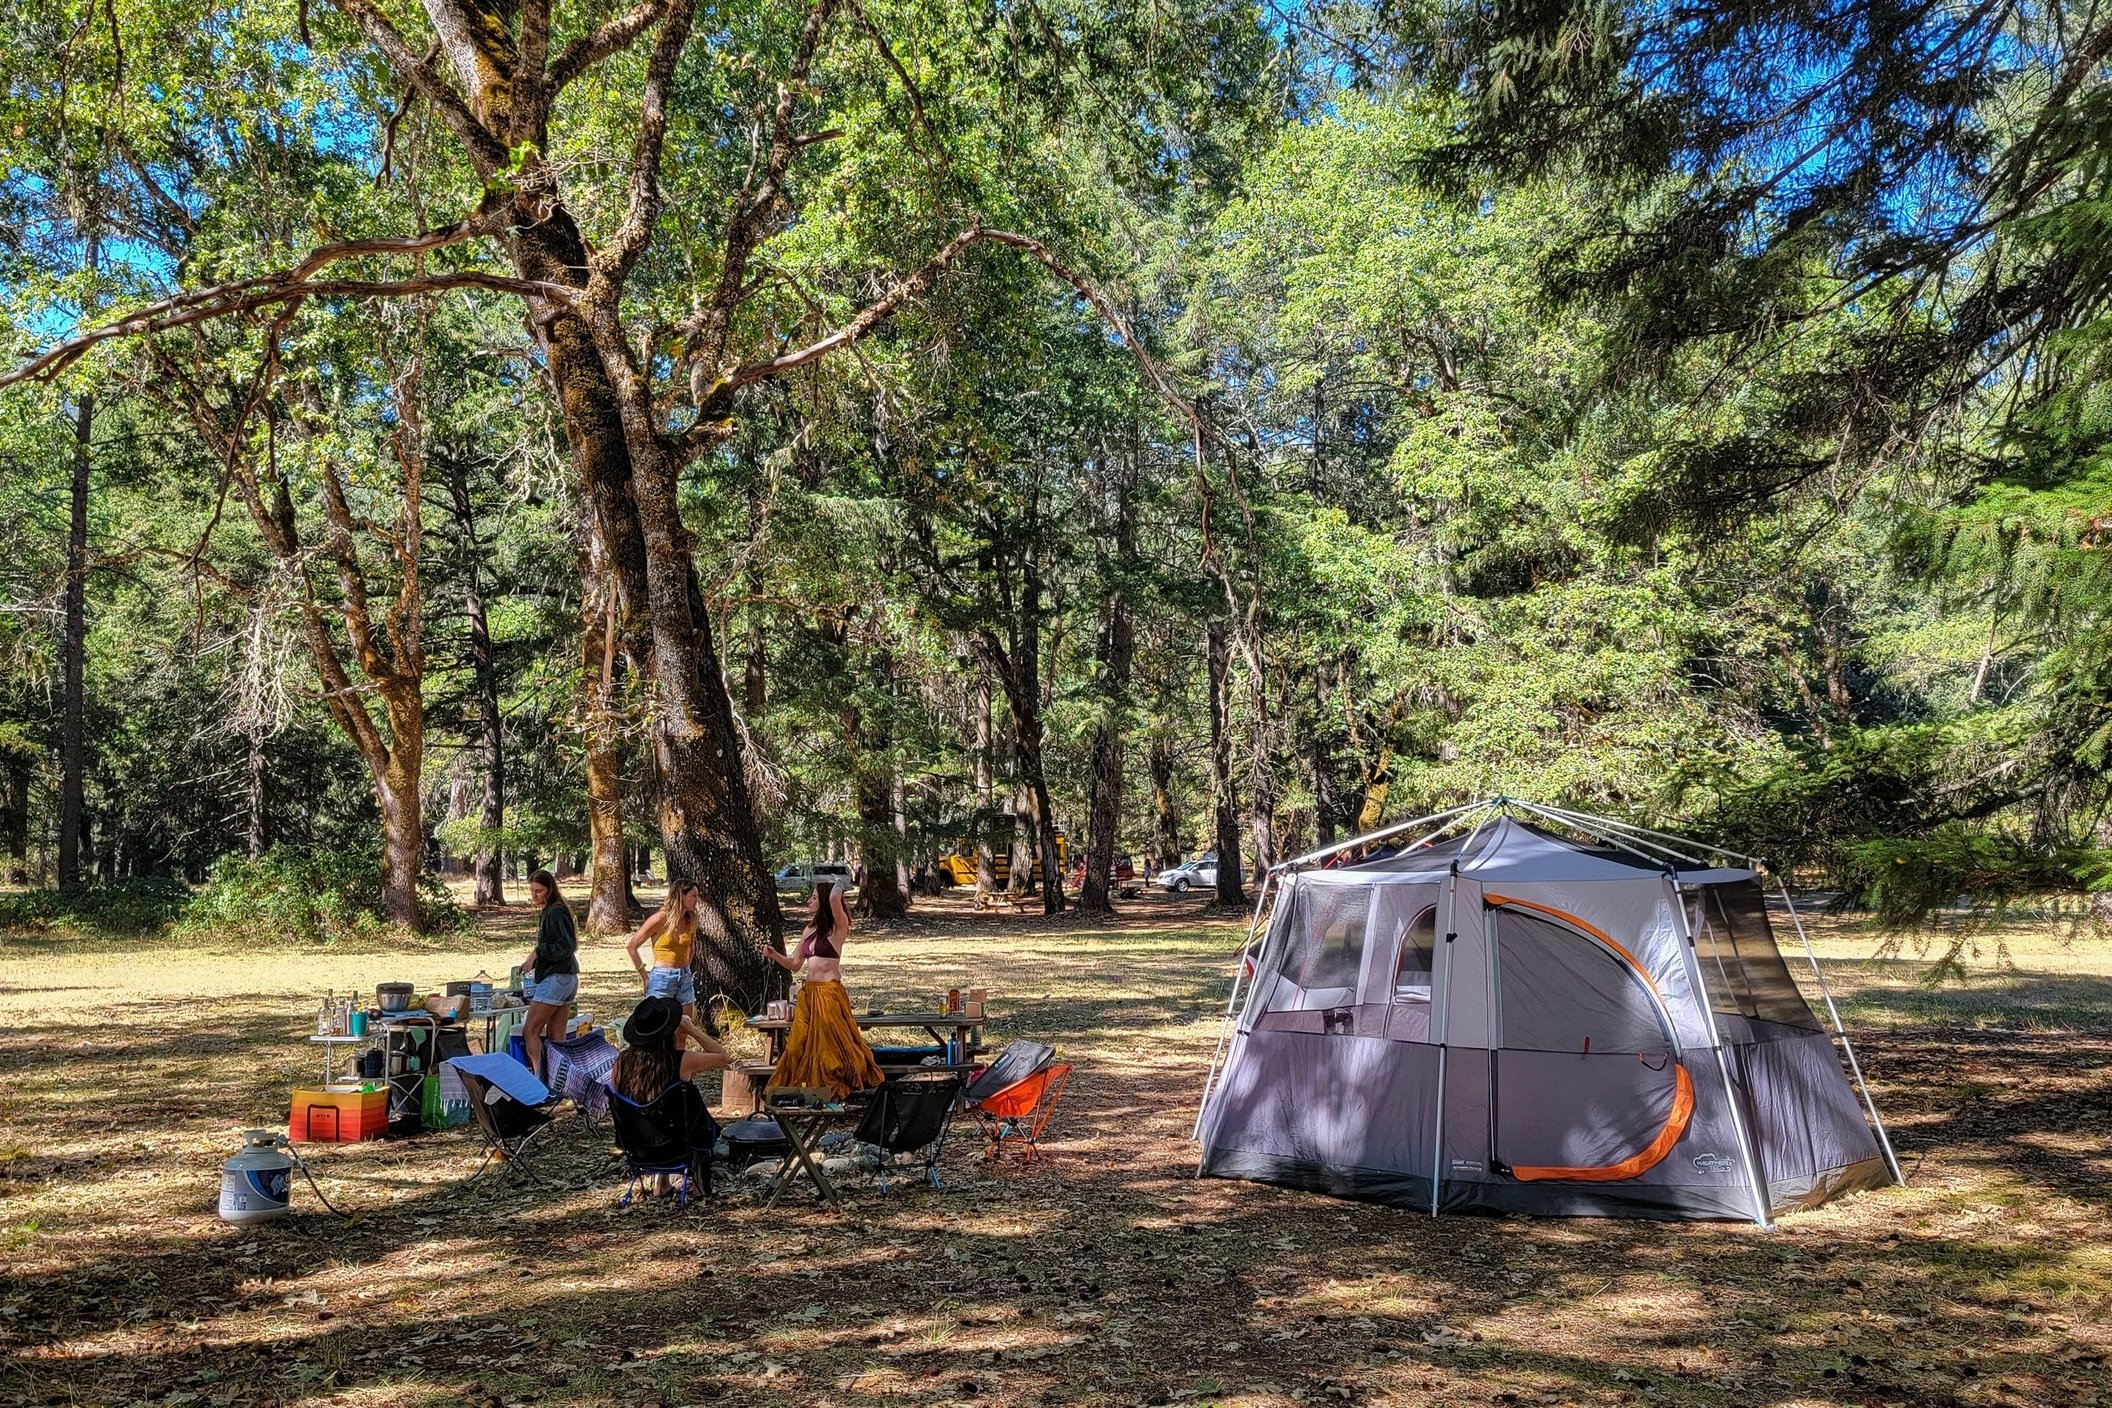 The Coleman Octagon 98 in a beautiful campsite surrounded by oak trees